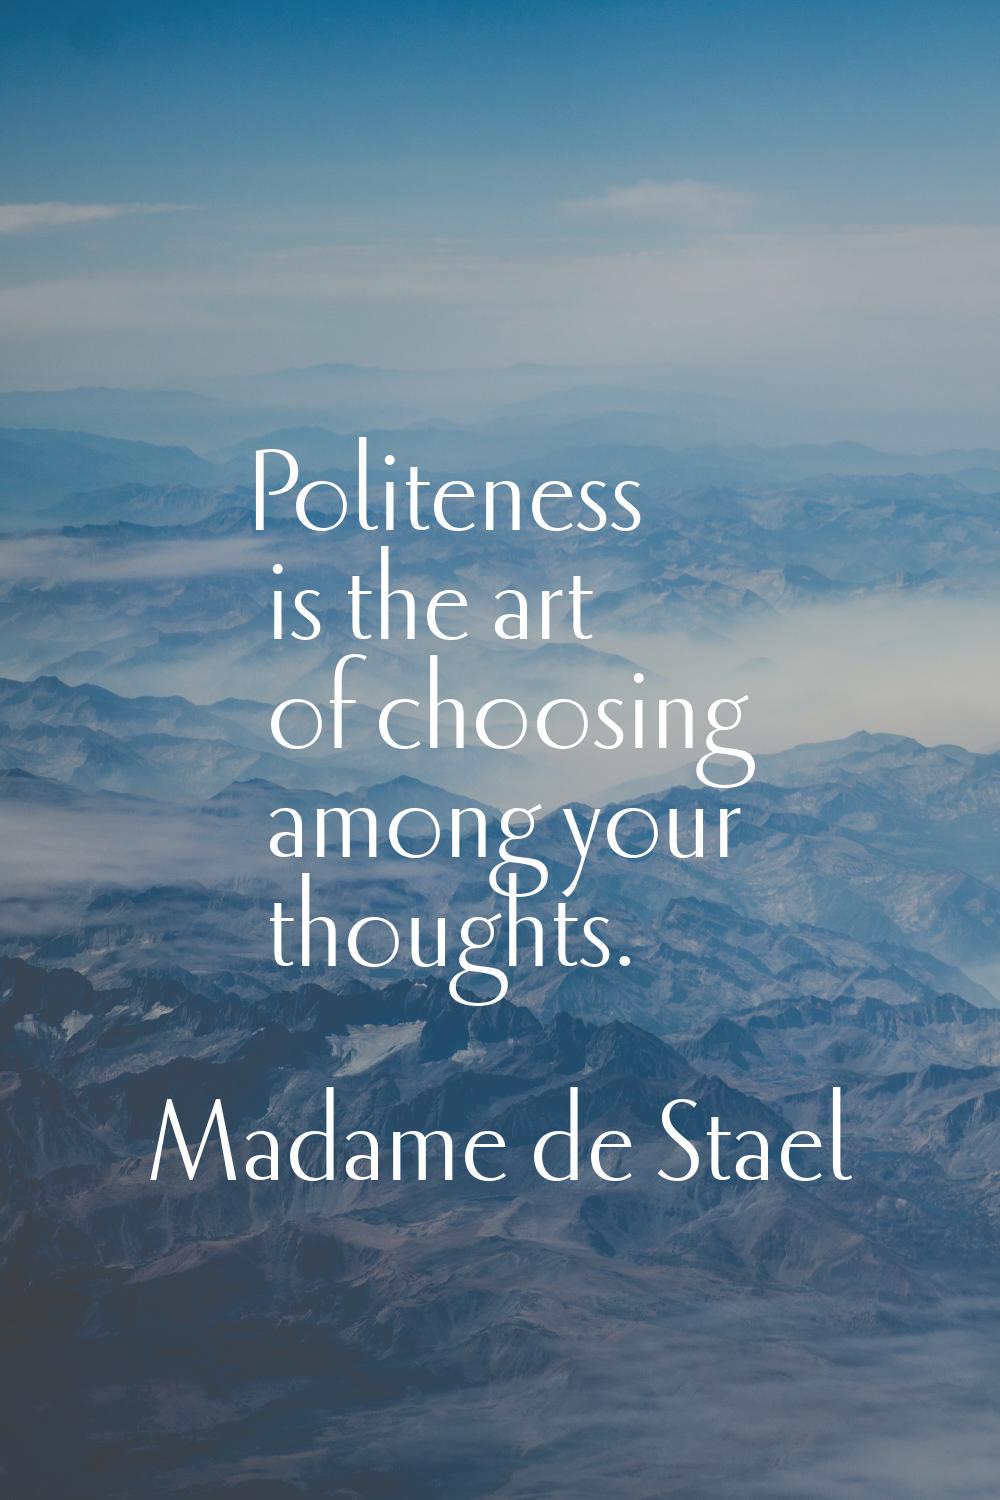 Politeness is the art of choosing among your thoughts.